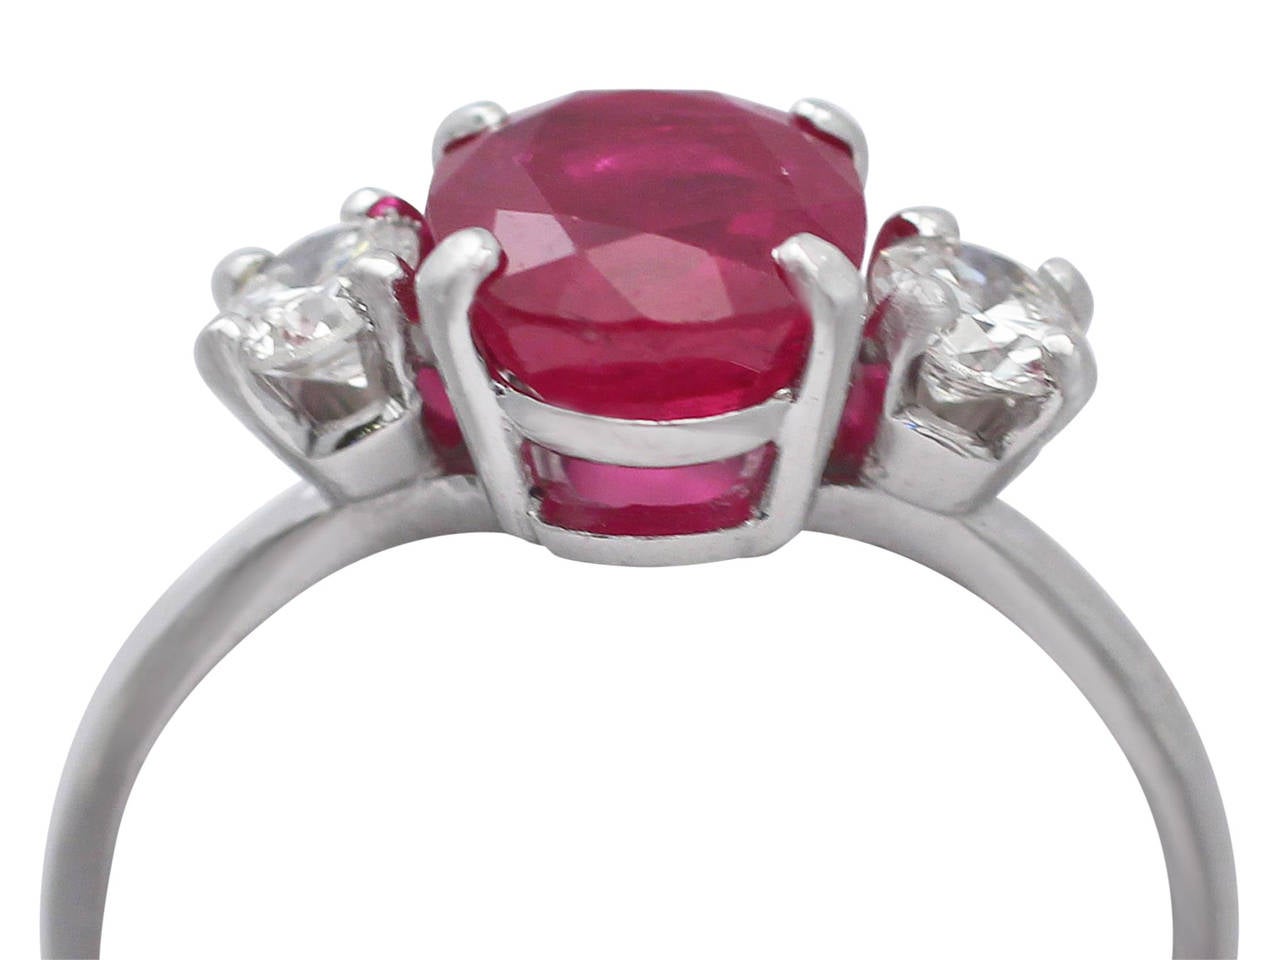 A fine and impressive vintage 2.02 carat natural ruby and 0.40 carat diamond, 18 karat white gold three stone/trilogy ring; an addition to our vintage jewelry and estate jewelry collections

This fine and impressive ruby and diamond trilogy ring